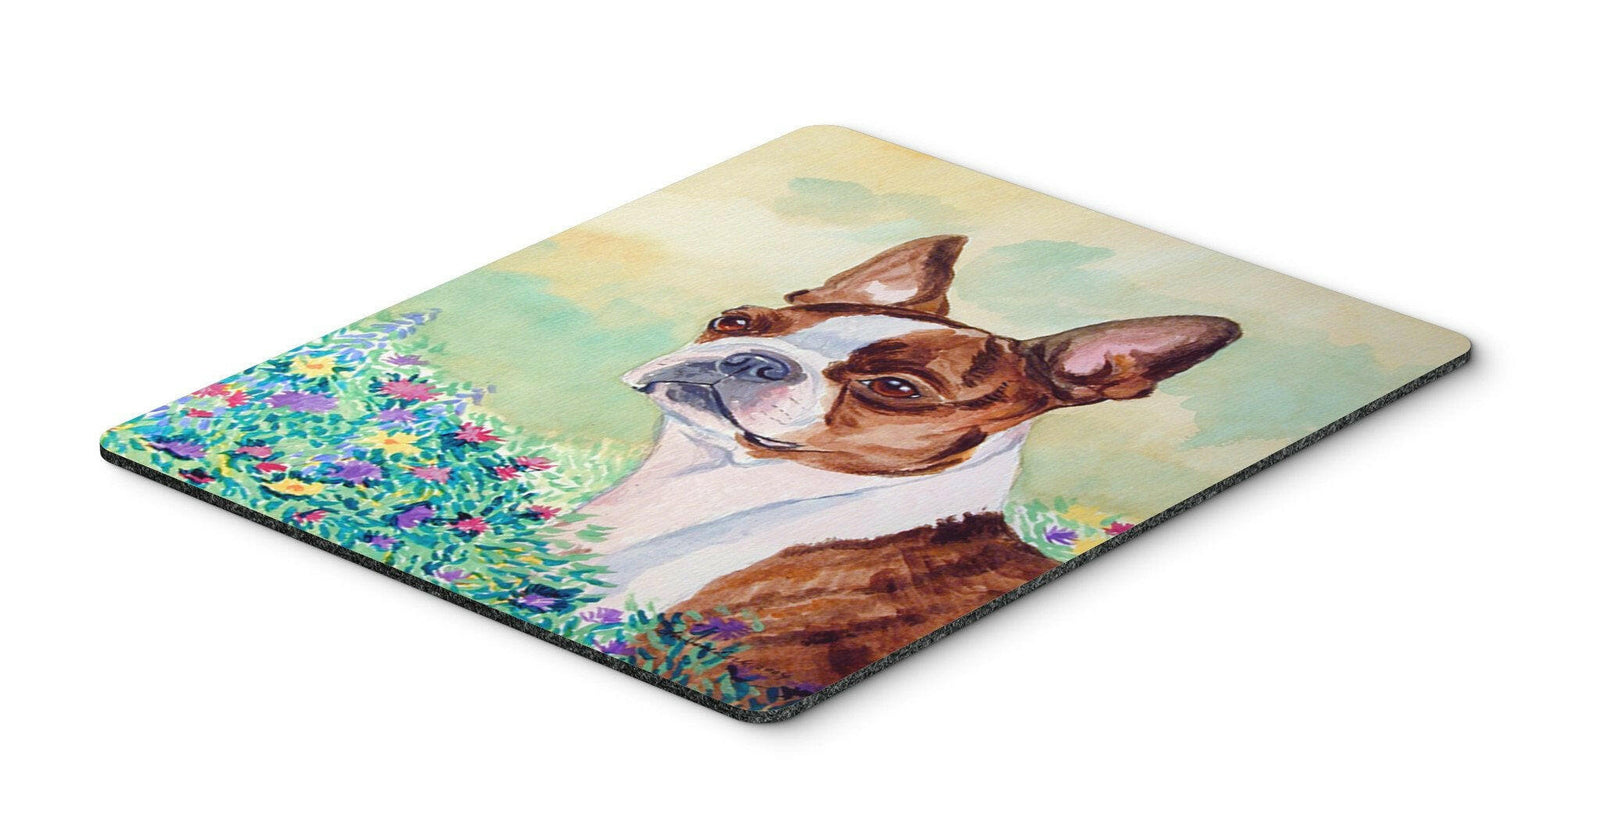 Red and White Boston Terrier Mouse Pad / Hot Pad / Trivet by Caroline's Treasures